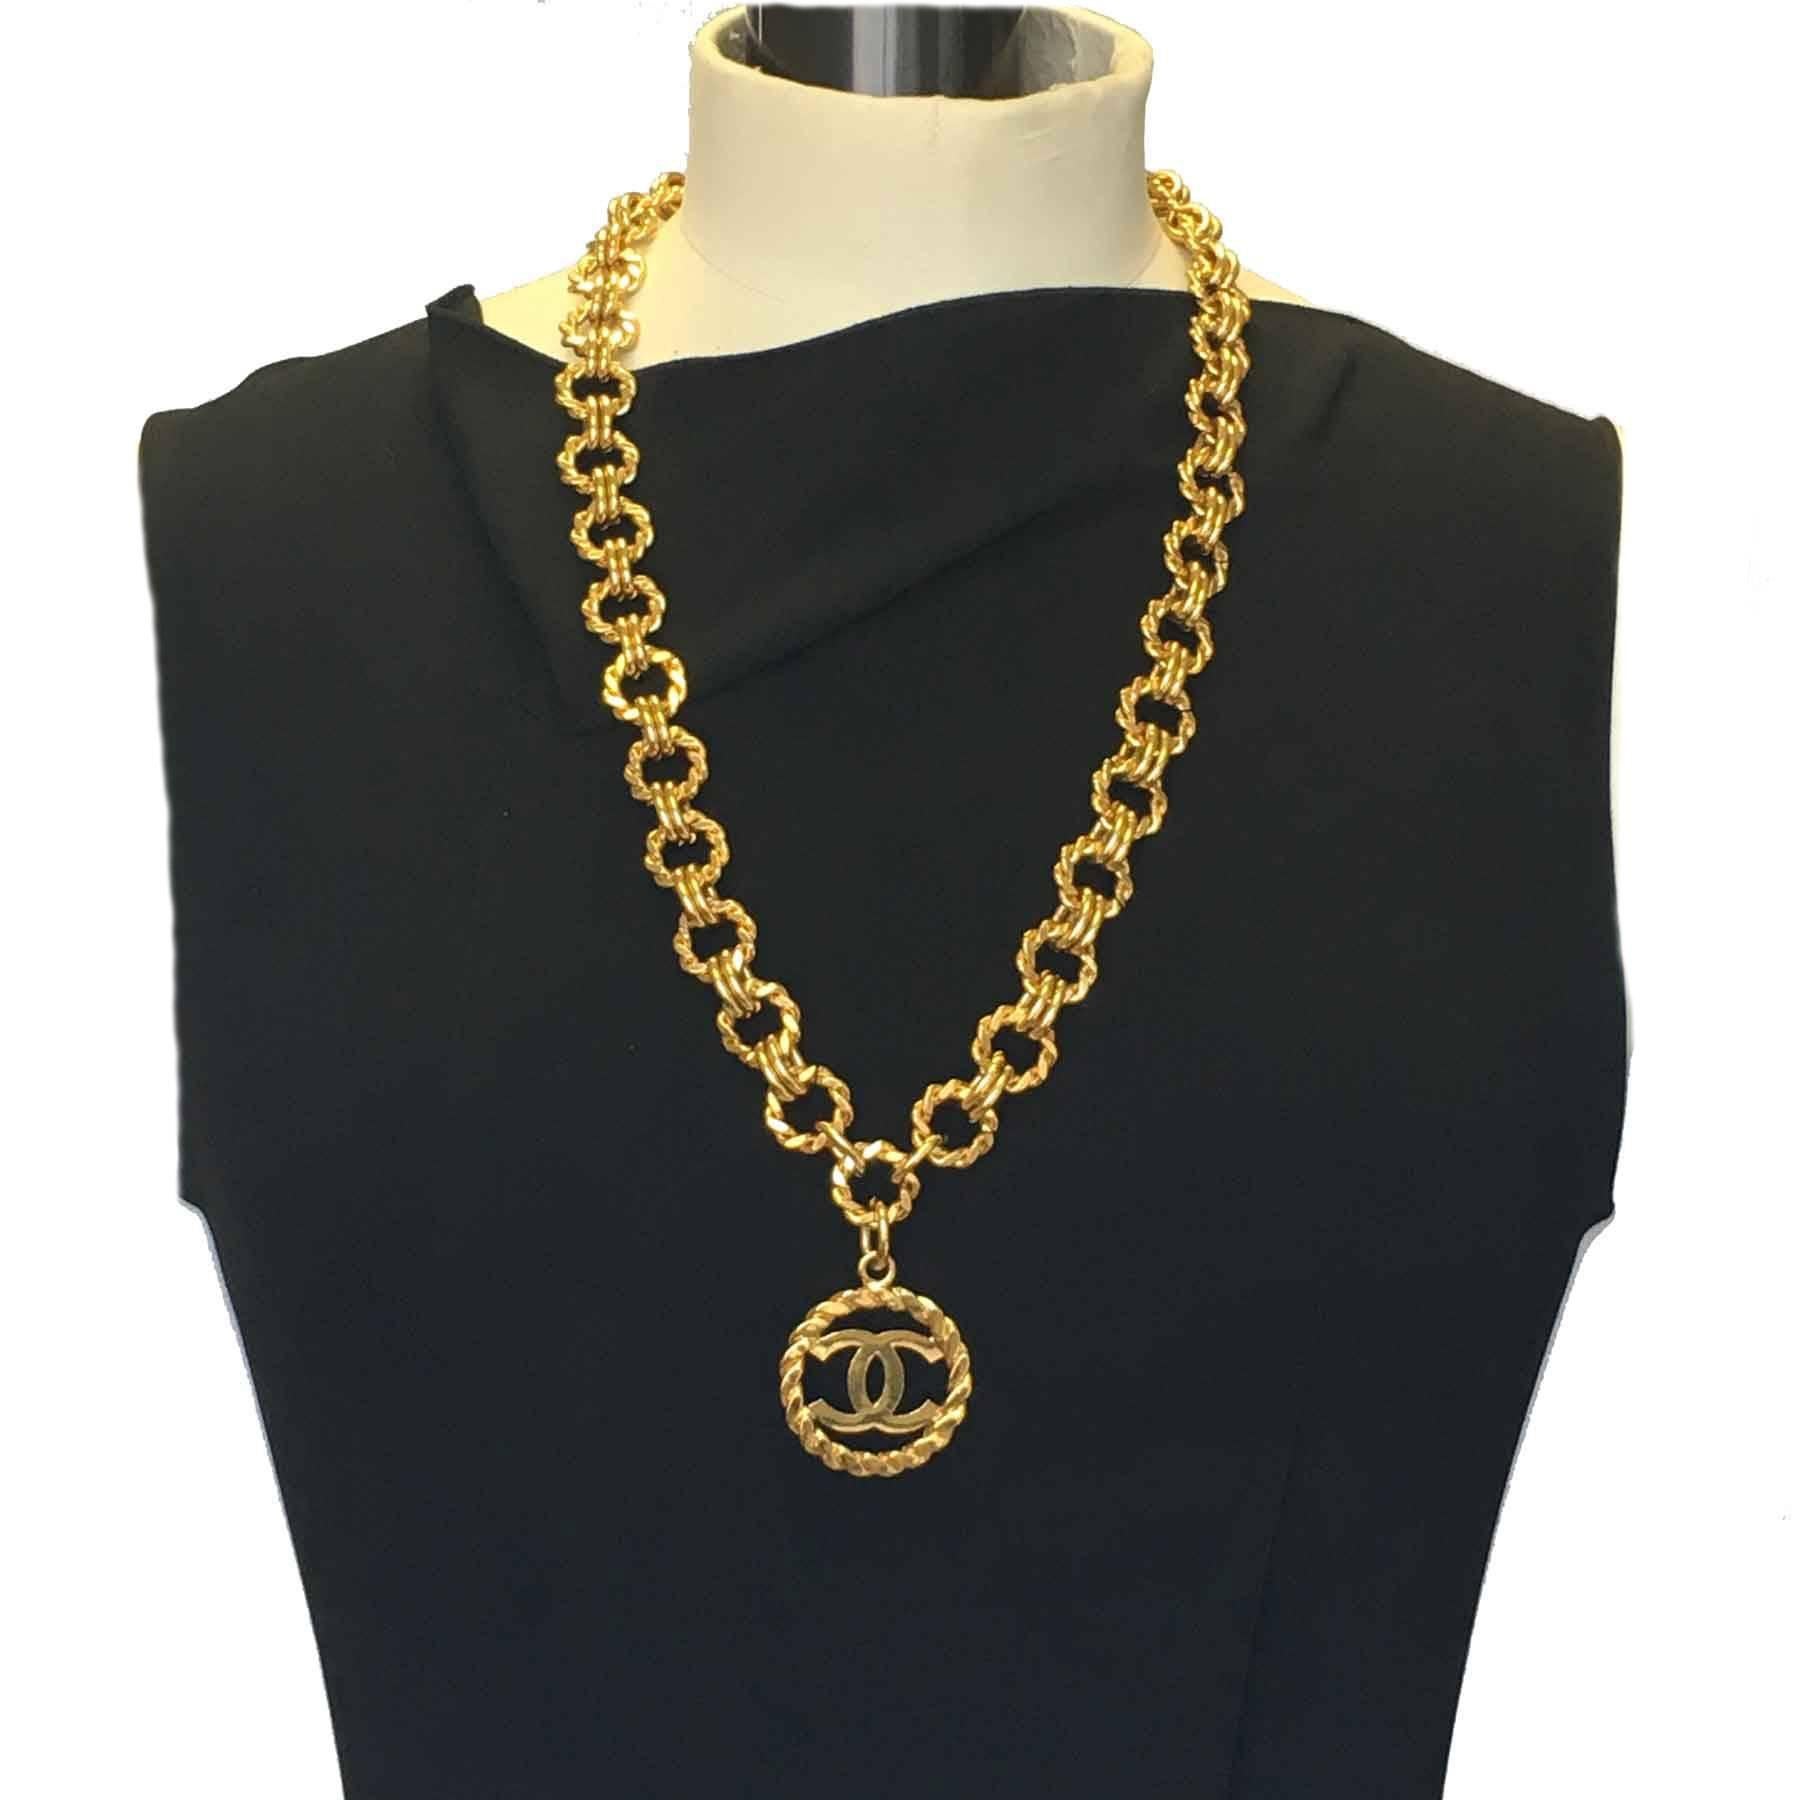 Stunning Vintage Chanel chain necklace with large chain and round pendant with a central CC in gilded metal.

Dimensions: diameter of the pendant: 3,7 cm 

Delivered in a Valois Vintage Paris Dustbag